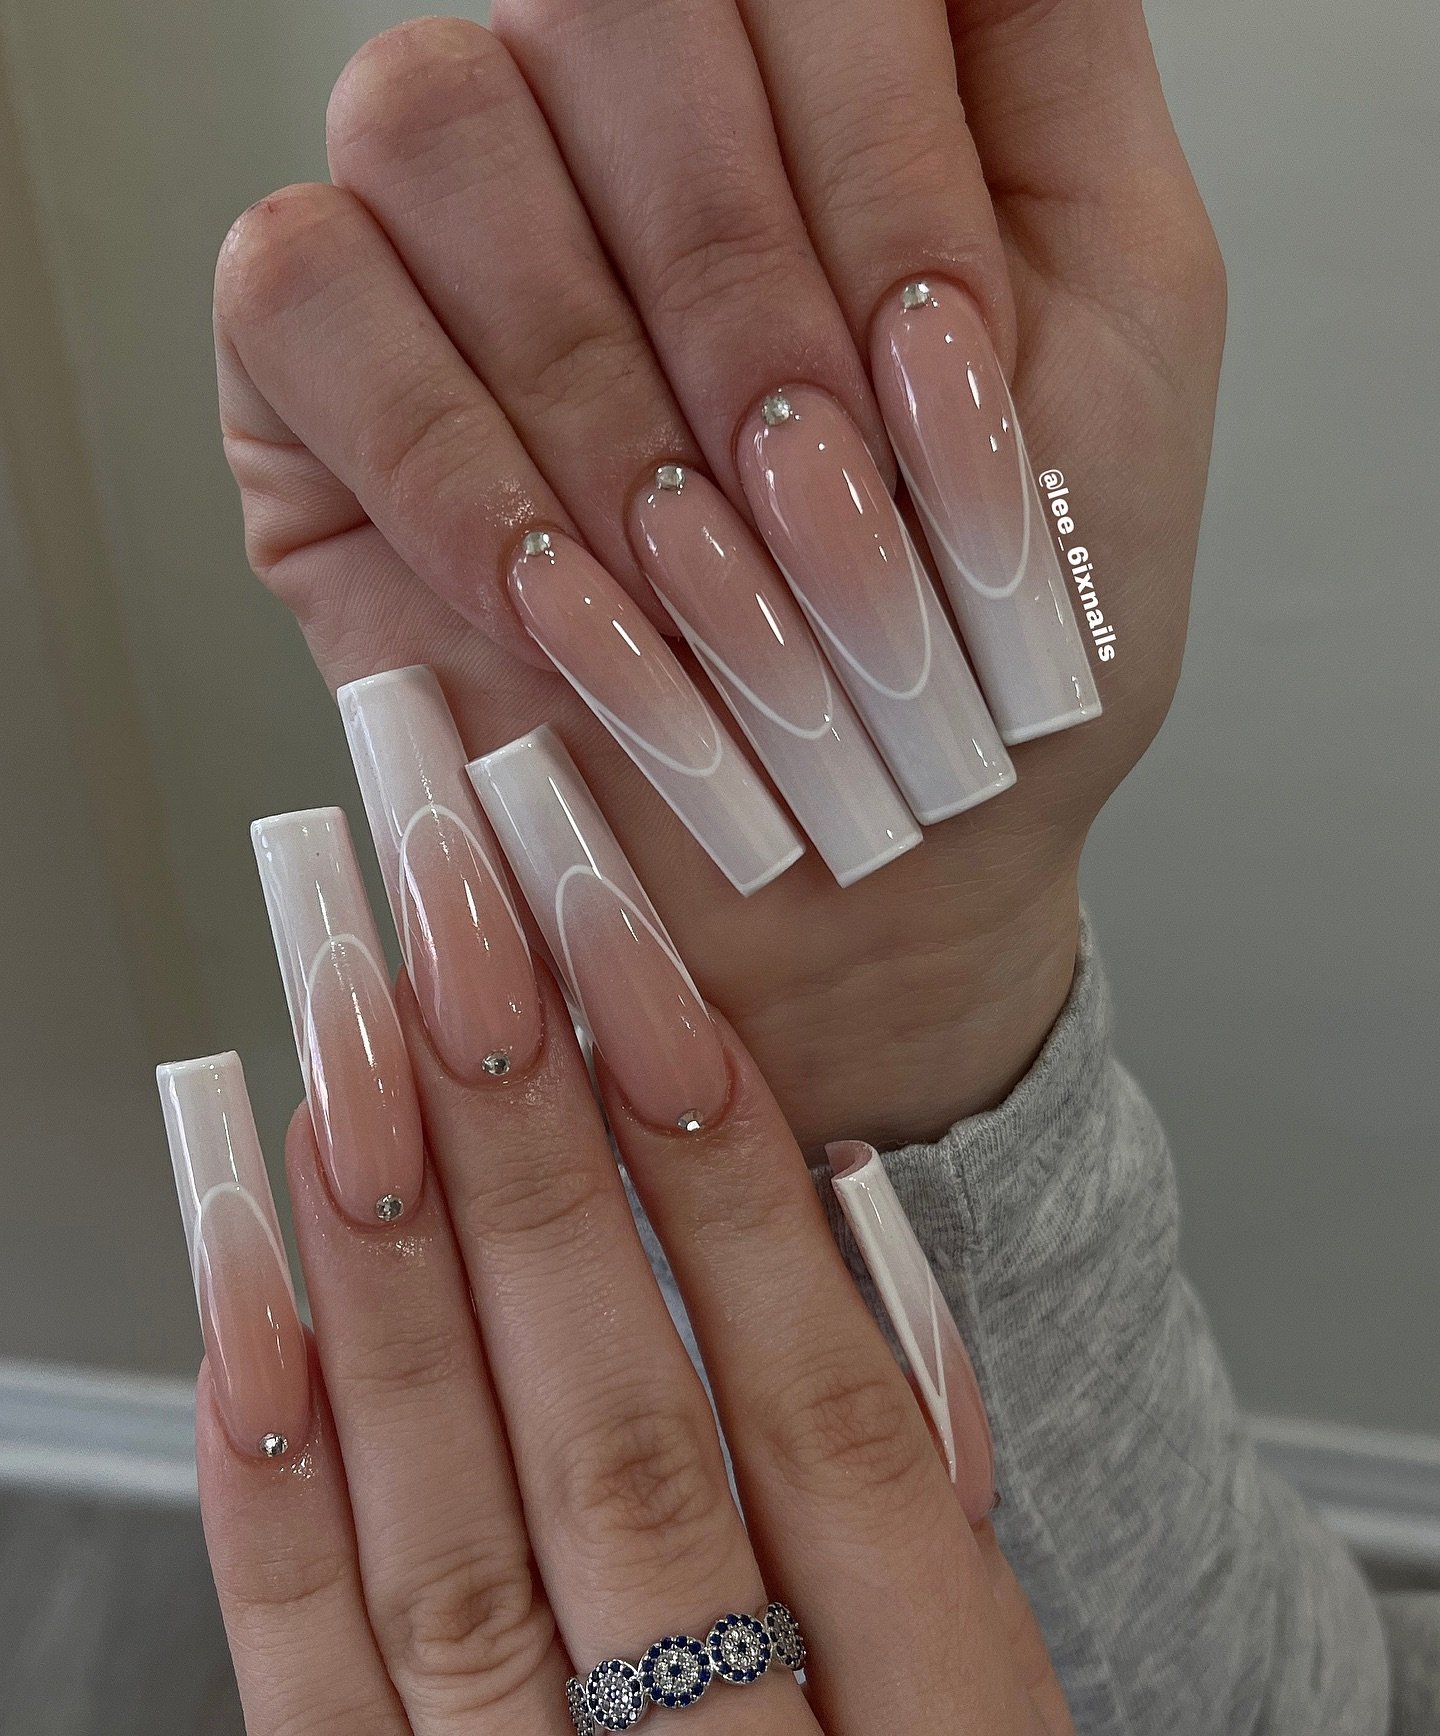 31 - Picture of Acrylic Nails